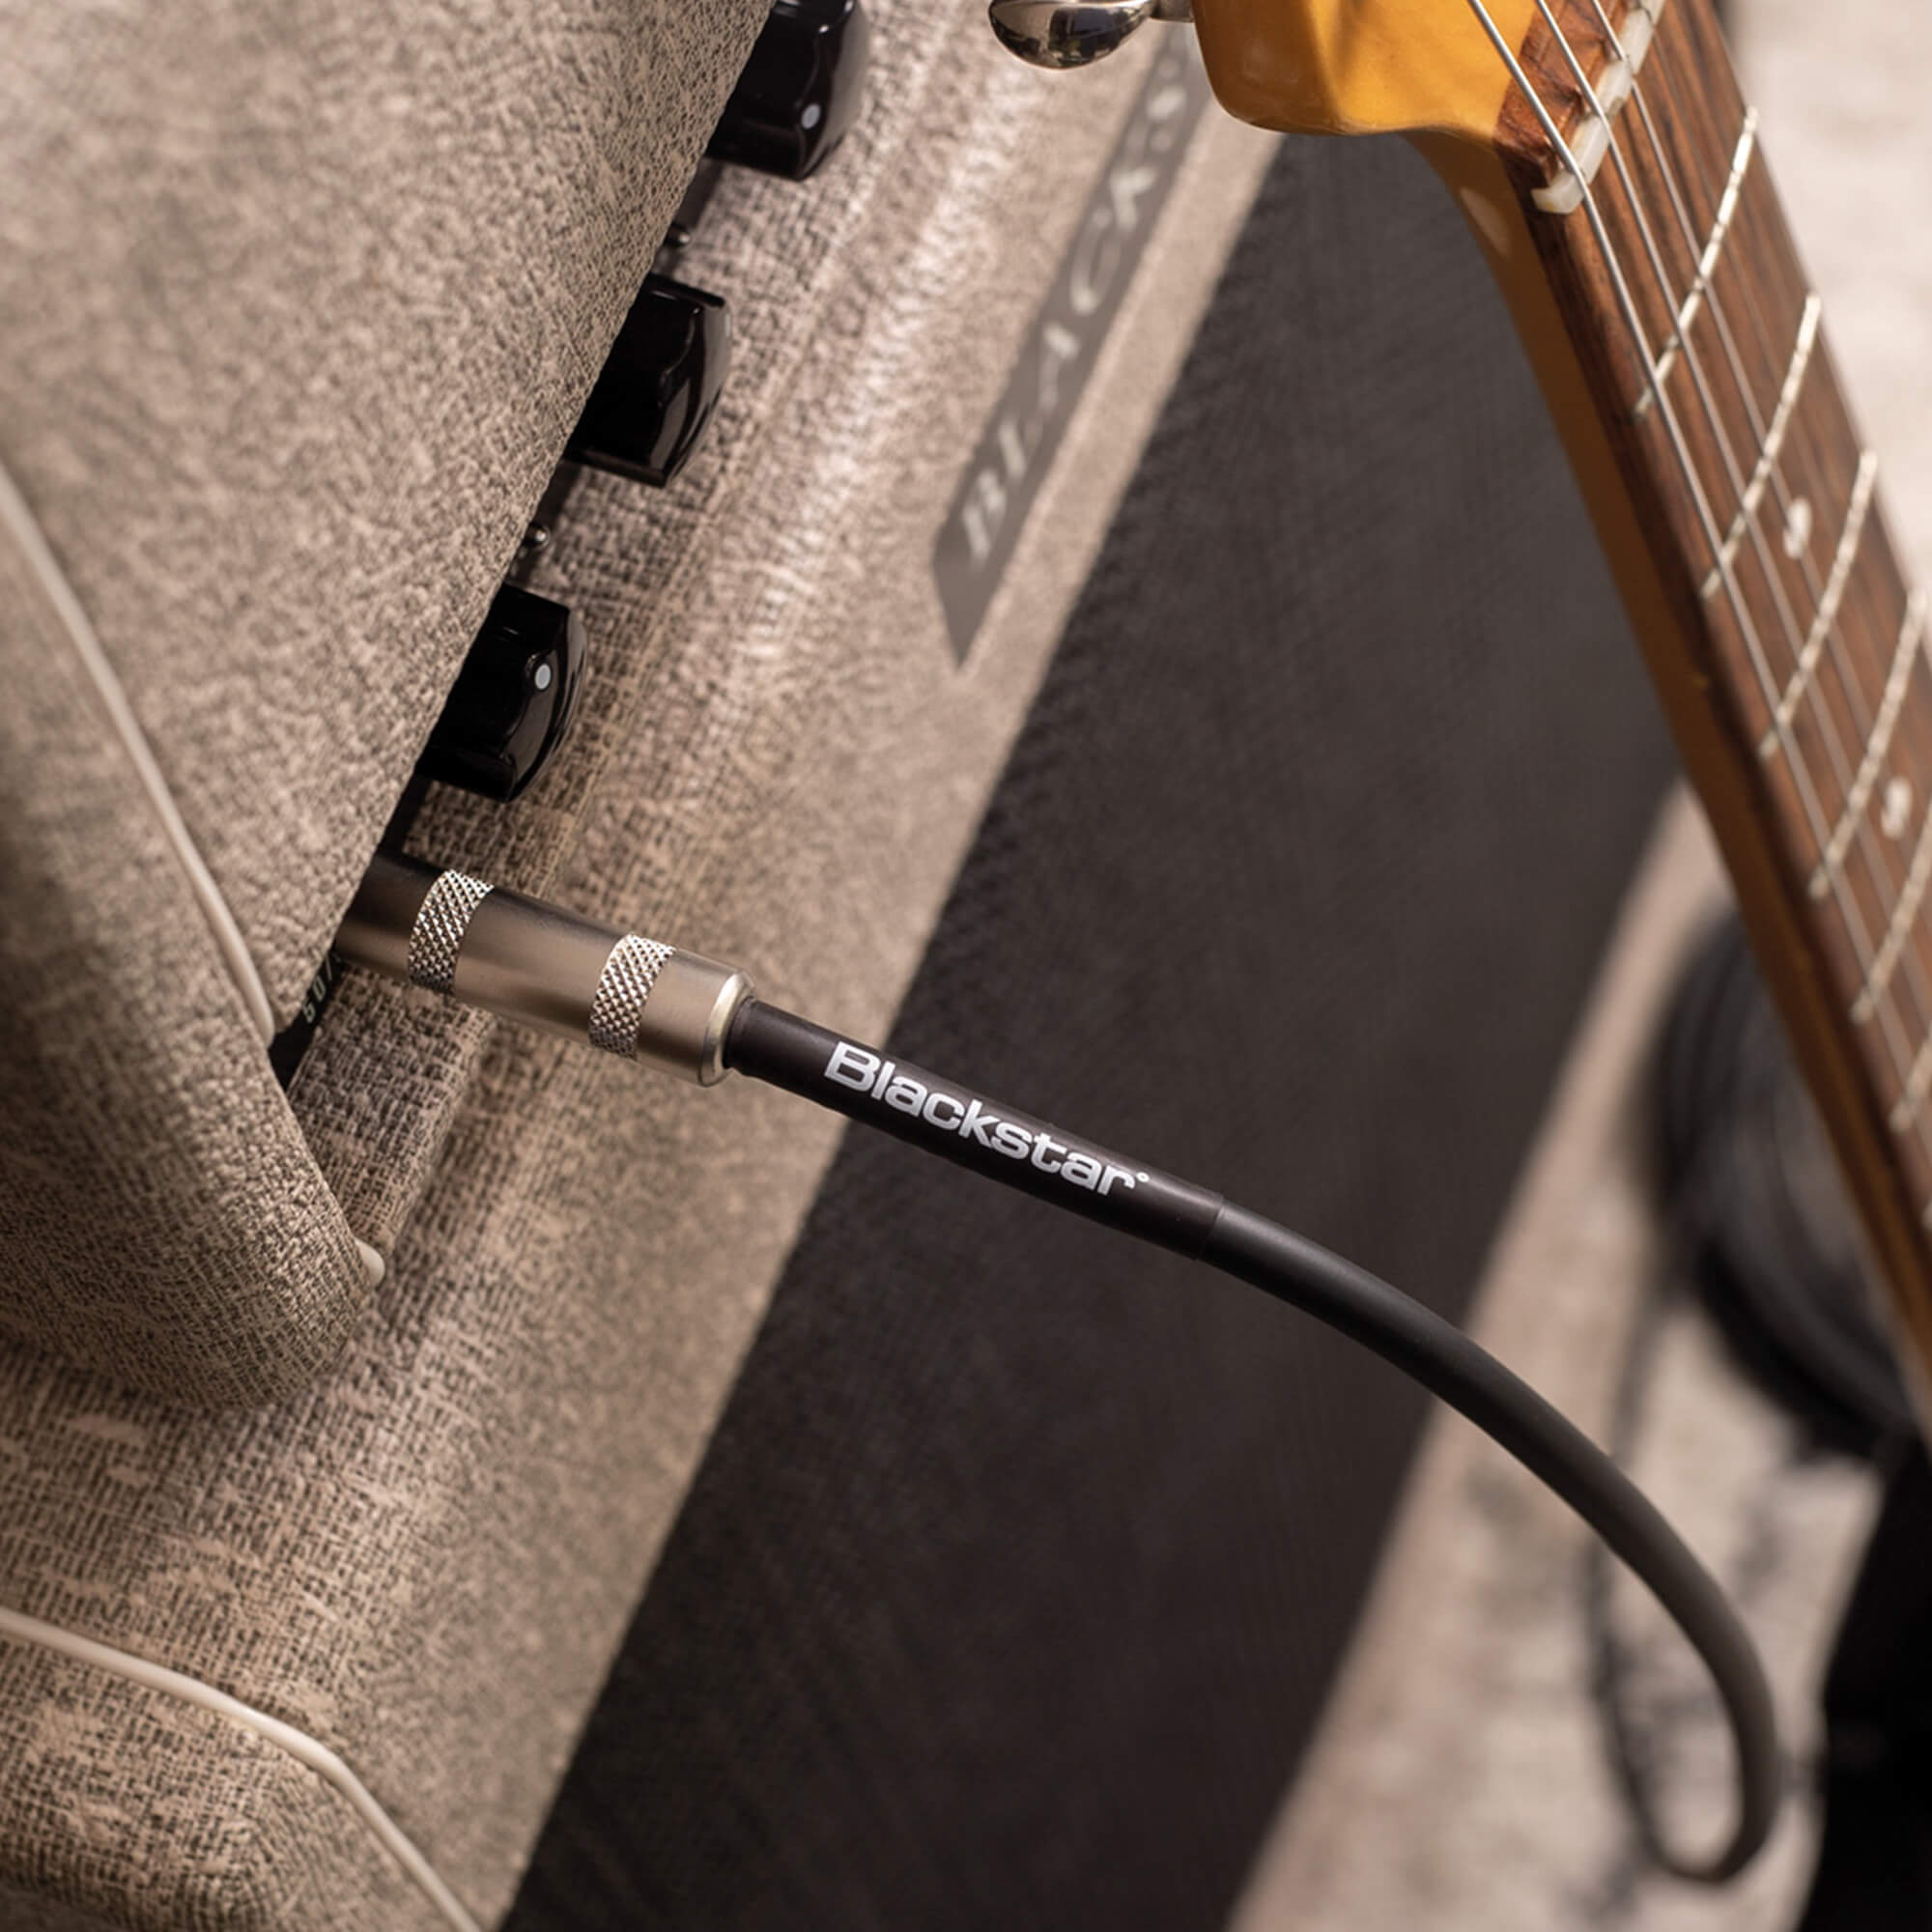 Blackstar instrument cable plugged into an amplifier